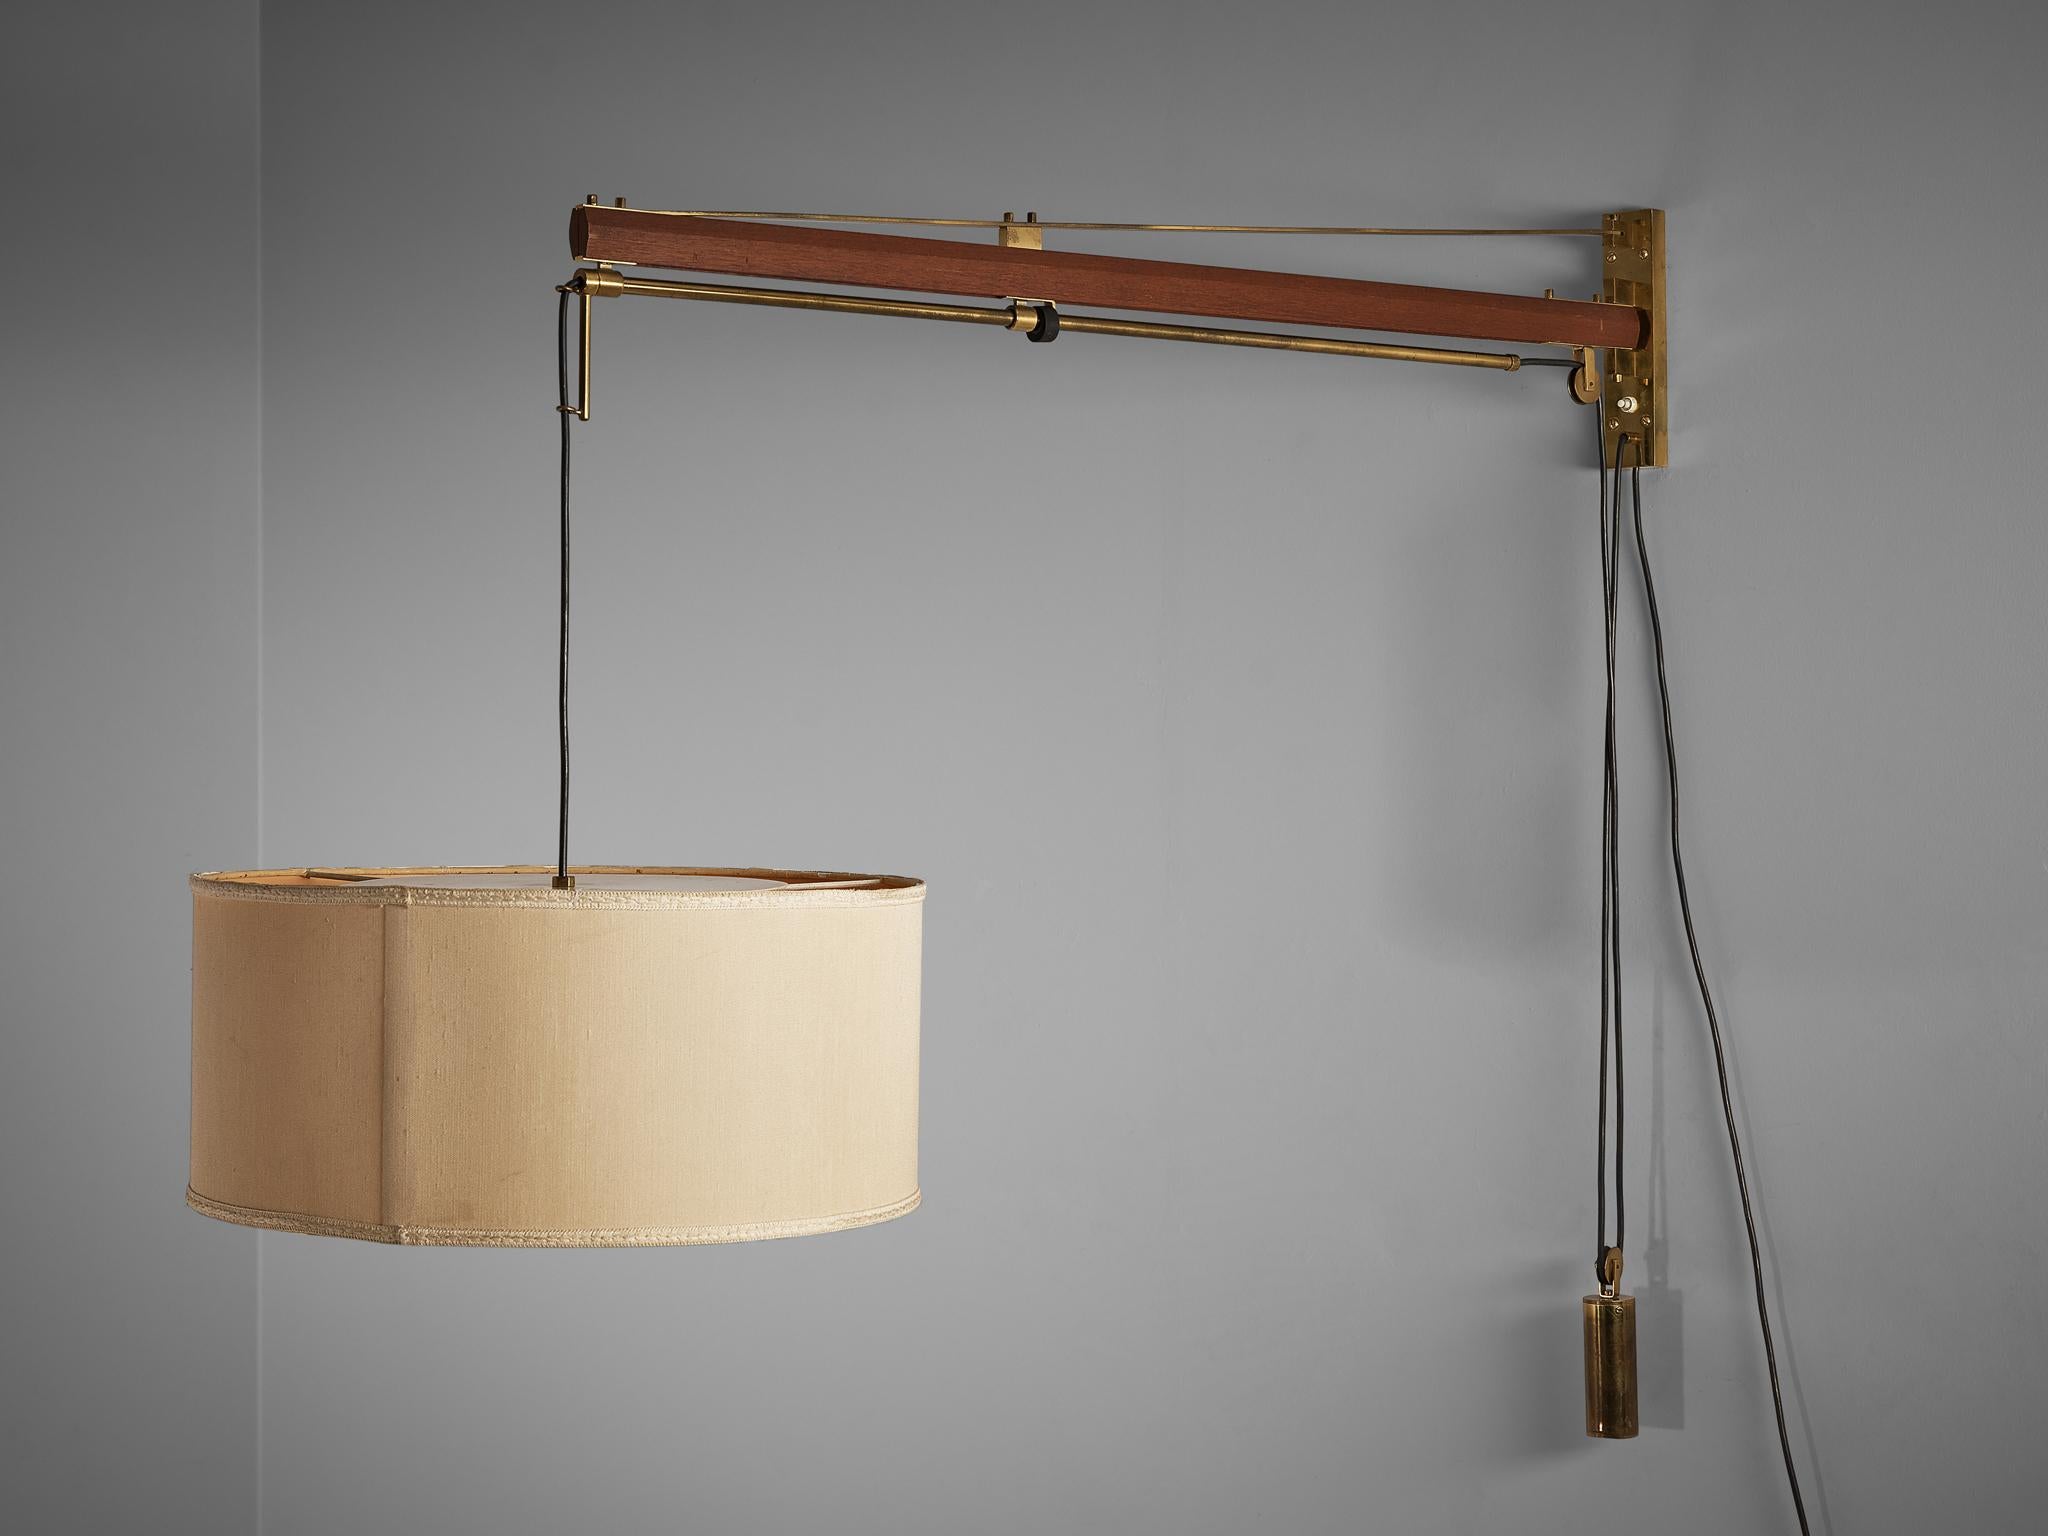 Tito Agnoli for O-Luce, wall light, white lacquered metal, teak, cord, brass, plastic, Italy, 1957. 

Impressive wall mounted light designed by Tito Agnoli, and manufactured by O-Luce. Unique for this item is the combination of elements derived from